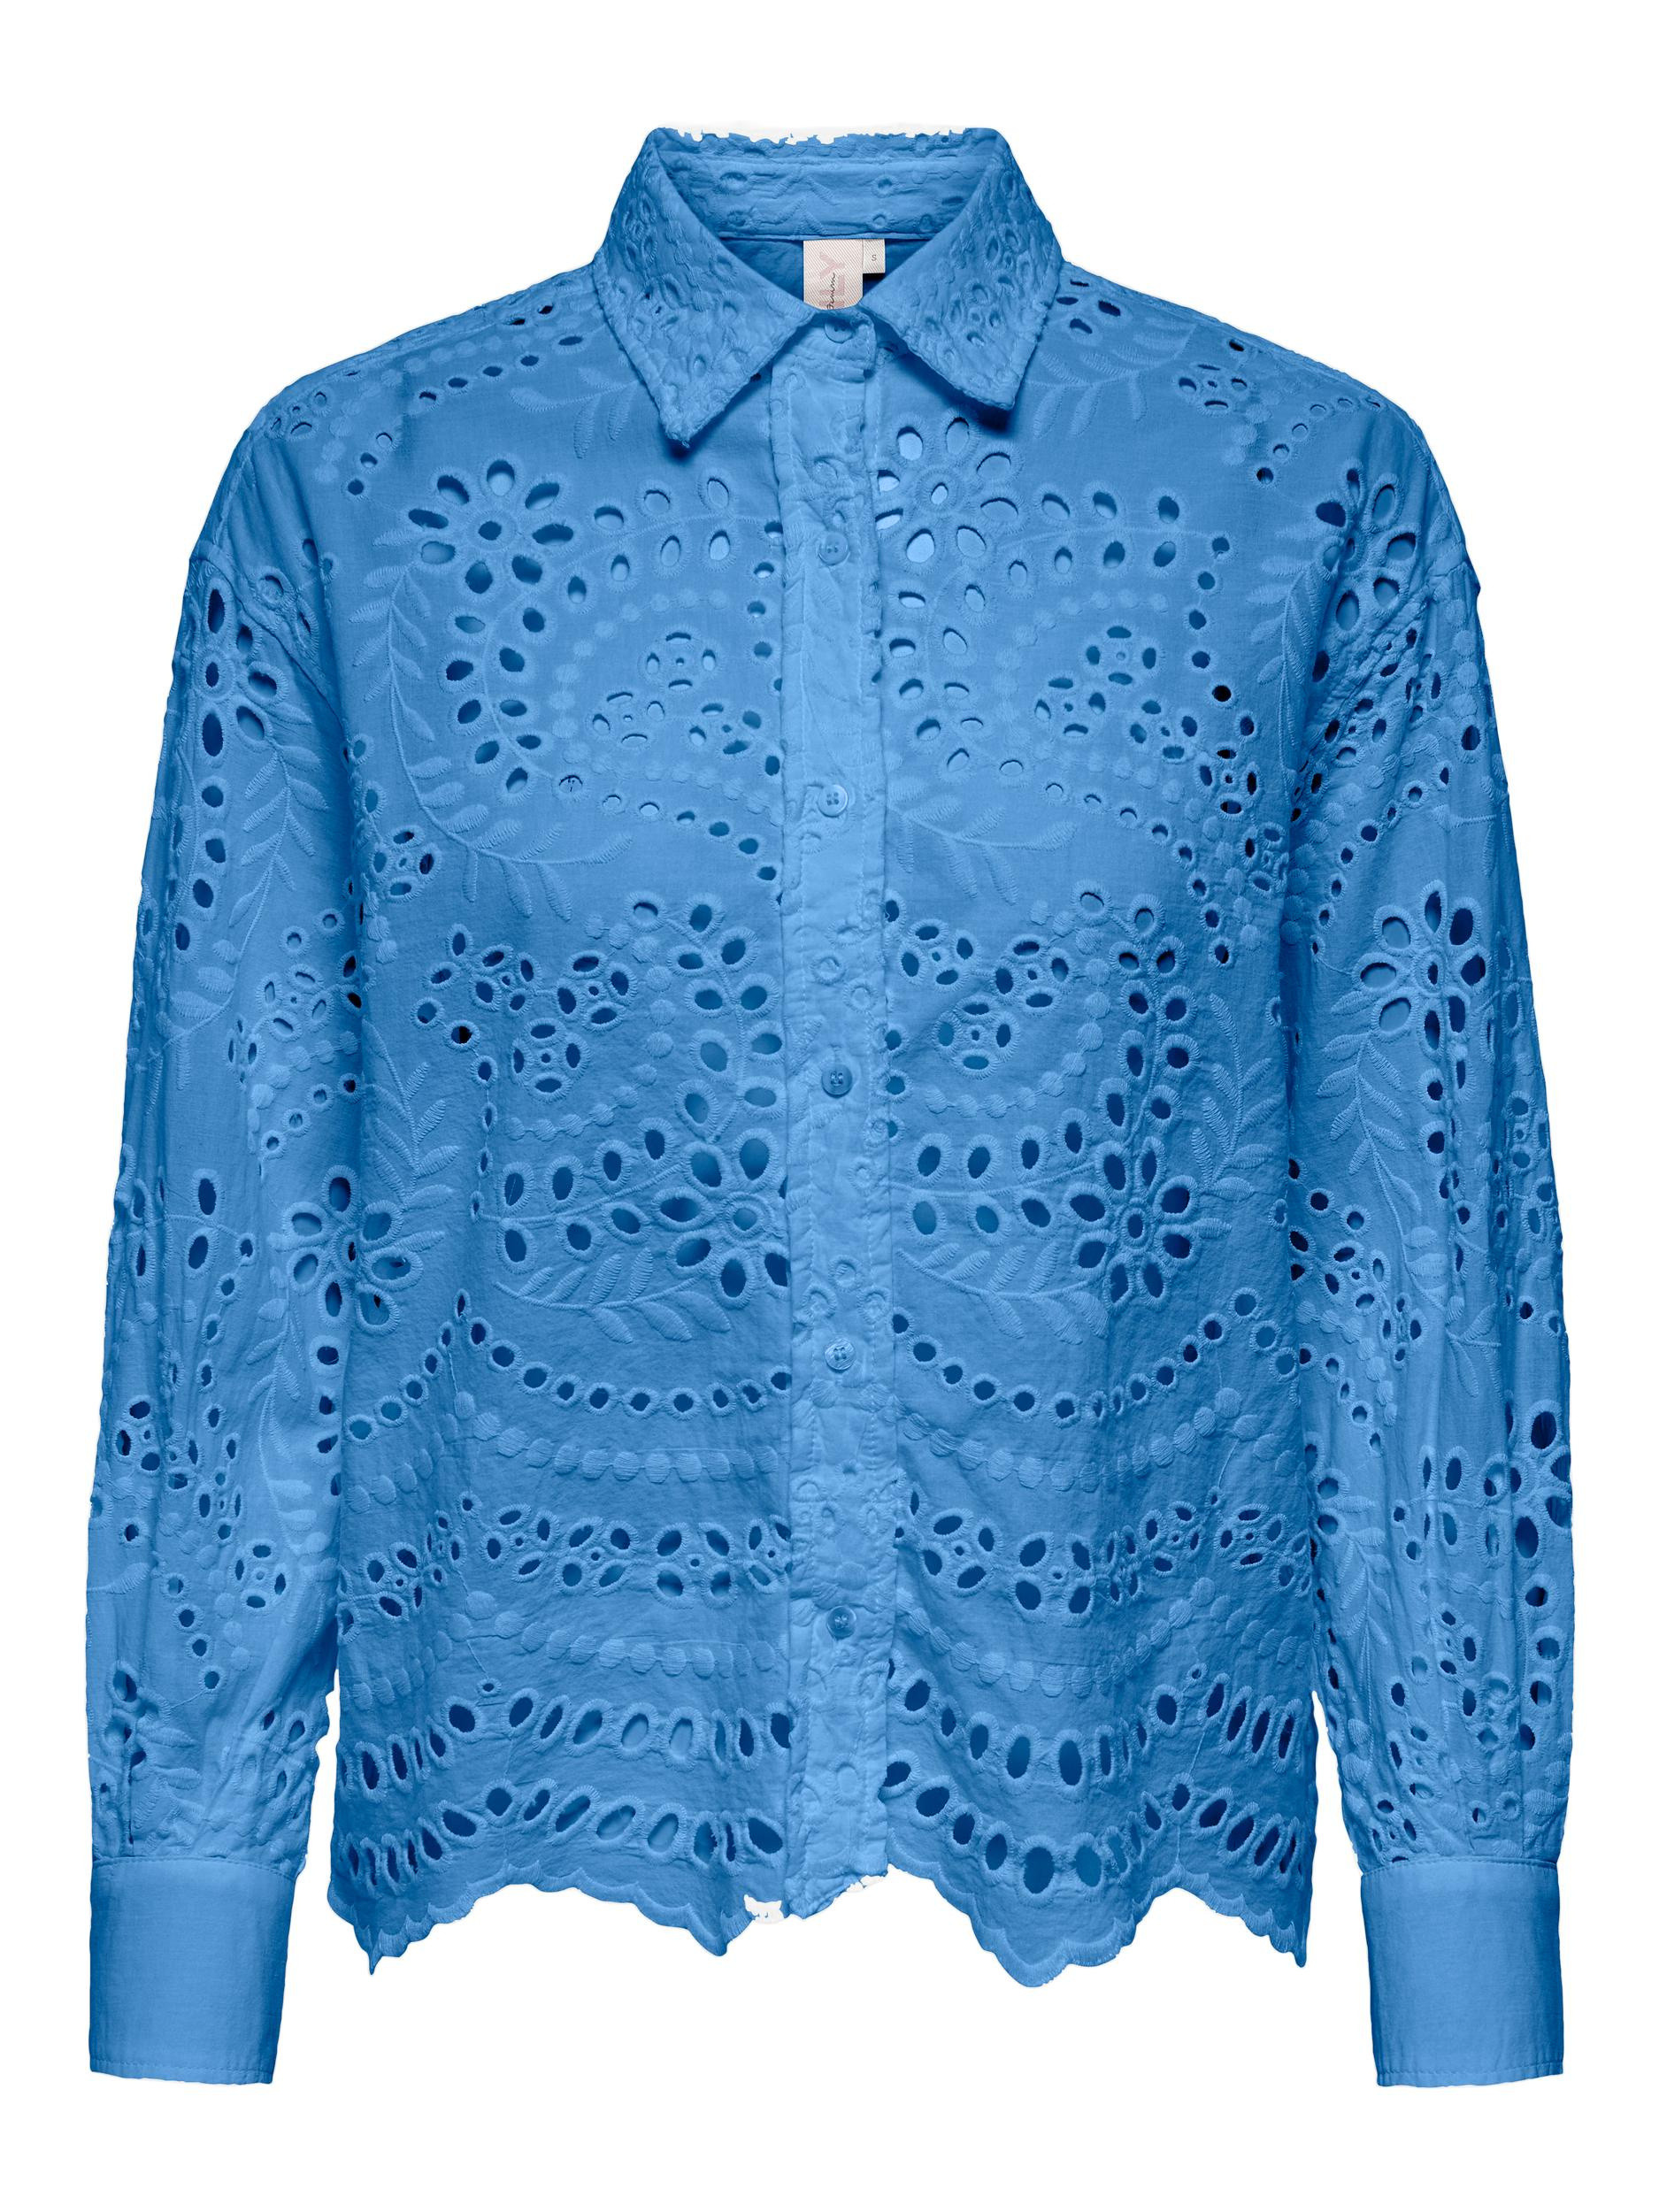 Only - Camicia boxy fit in pizzo, Azzurro, large image number 0